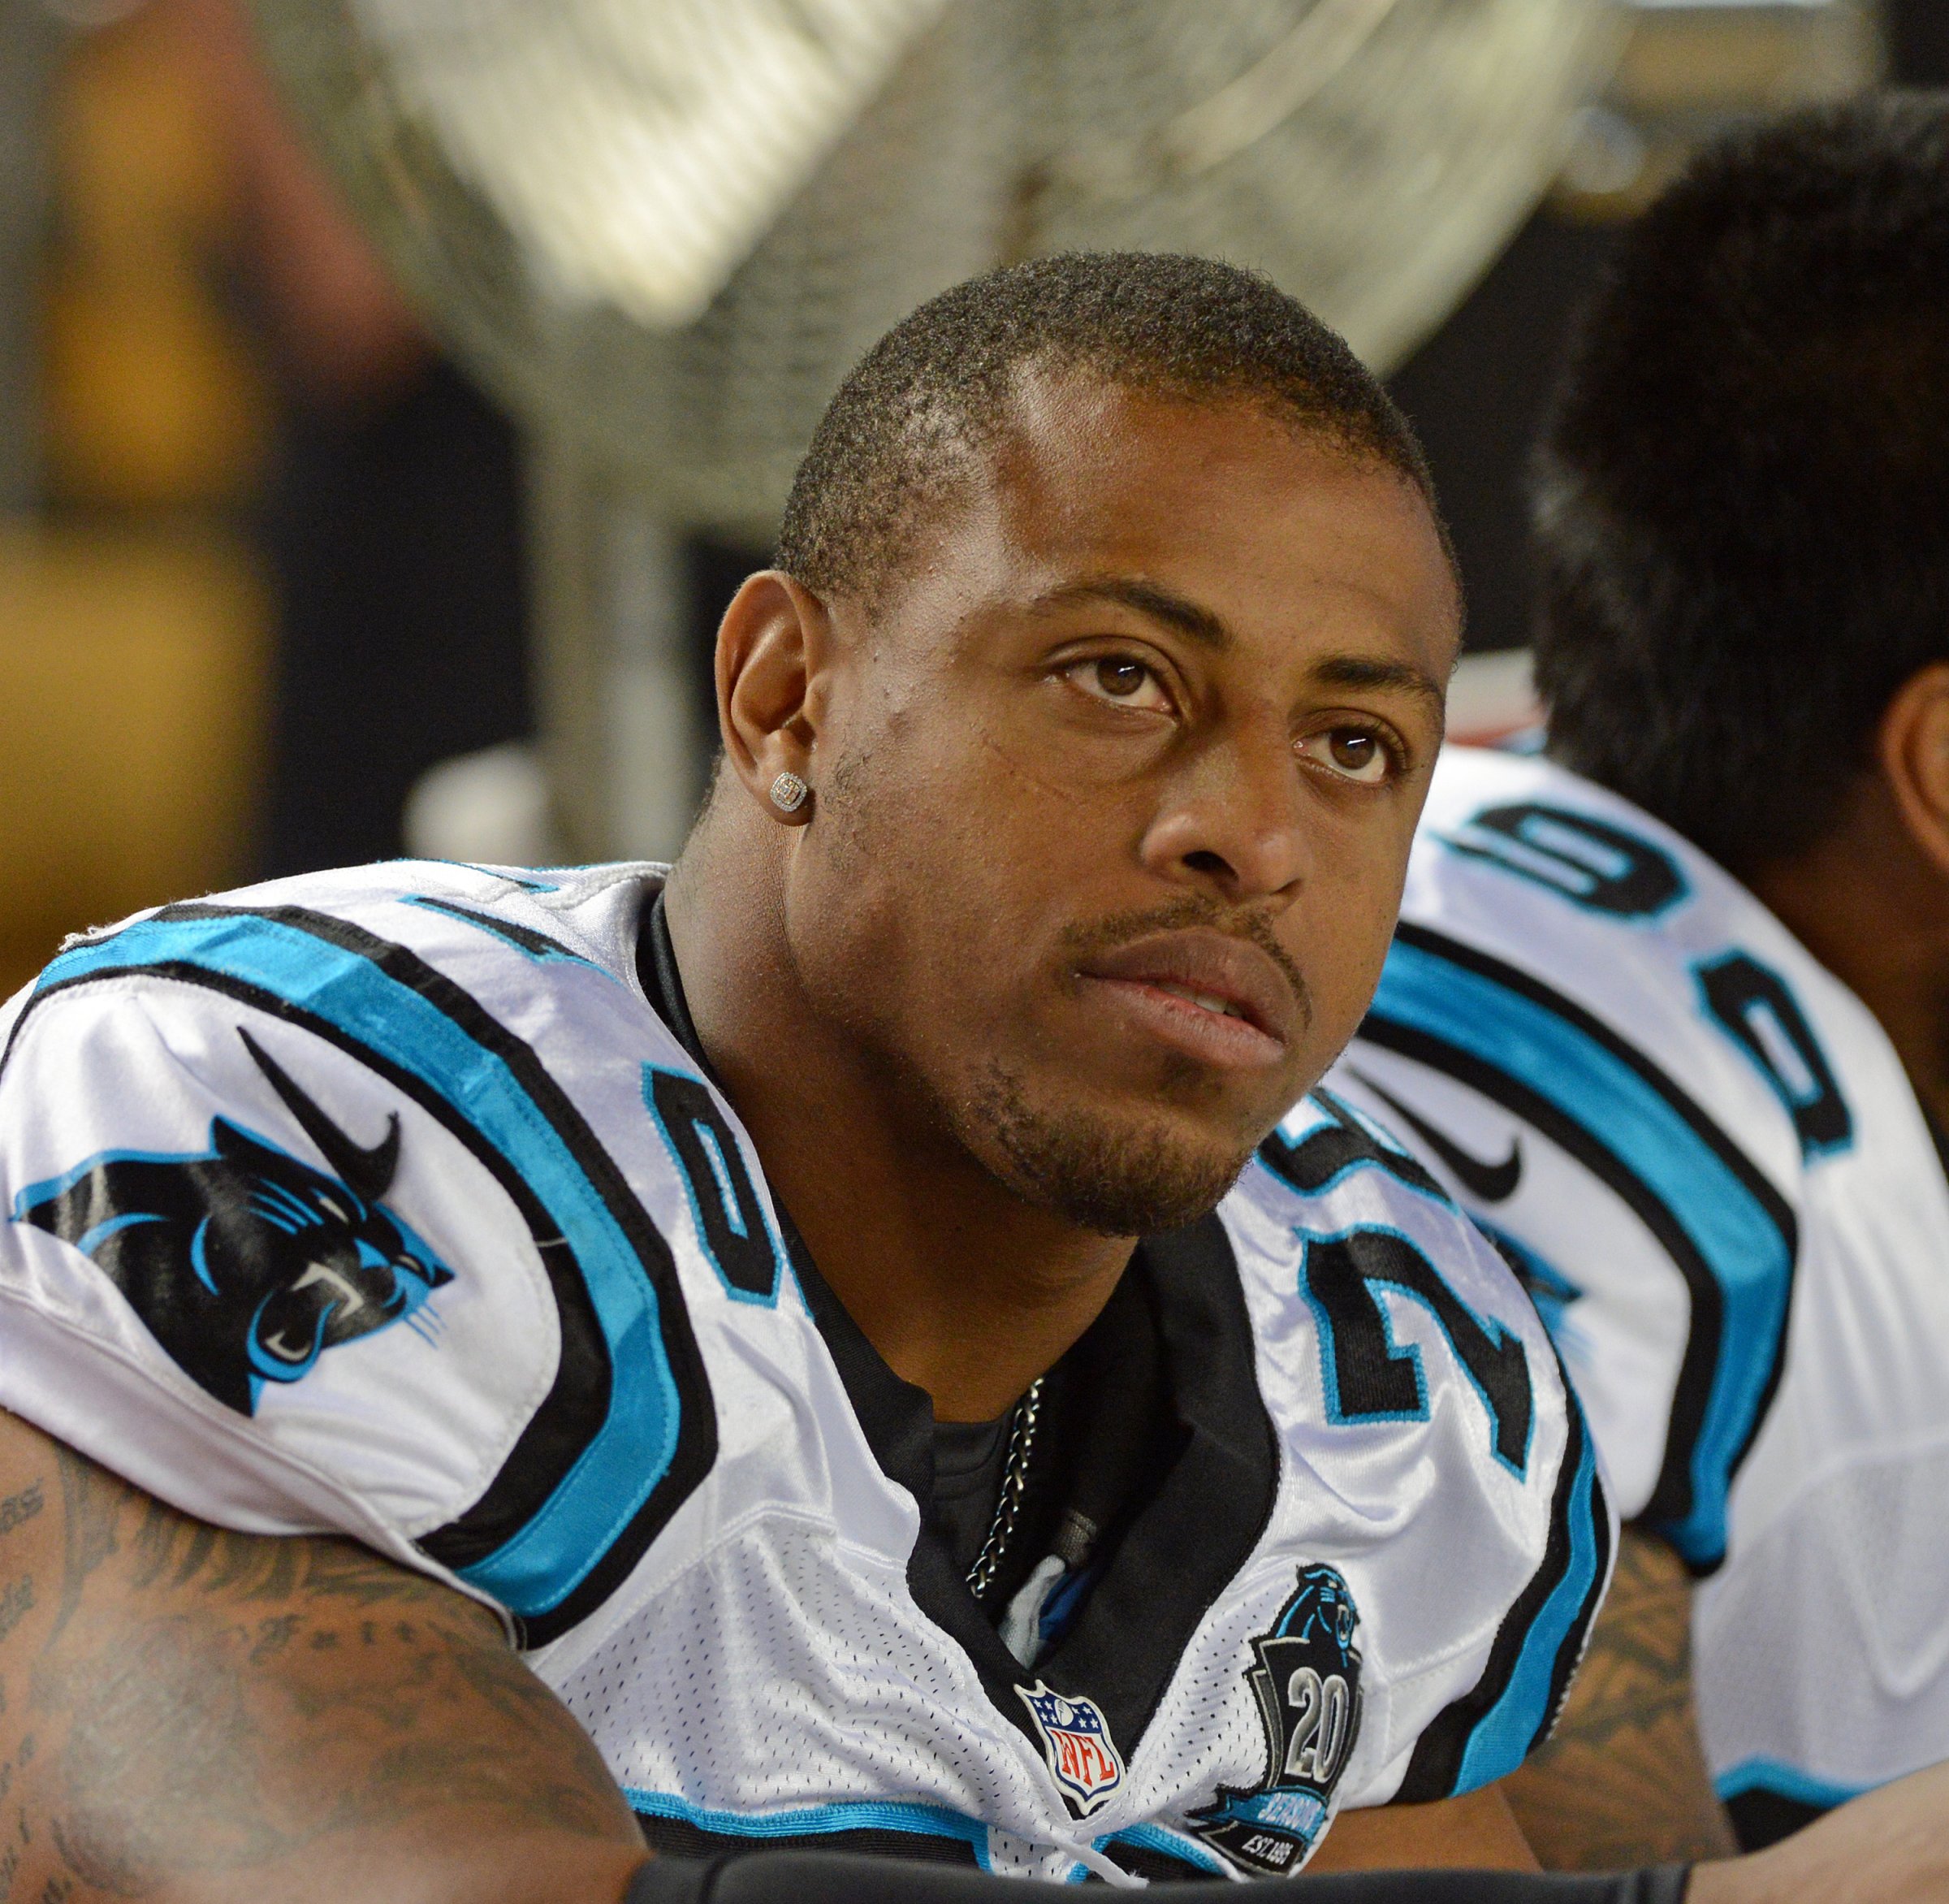 Defensive lineman Greg Hardy of the Carolina Panthers looks on from the sideline during a preseason game against the Pittsburgh Steelers at Heinz Field on Aug. 28, 2014 in Pittsburgh.